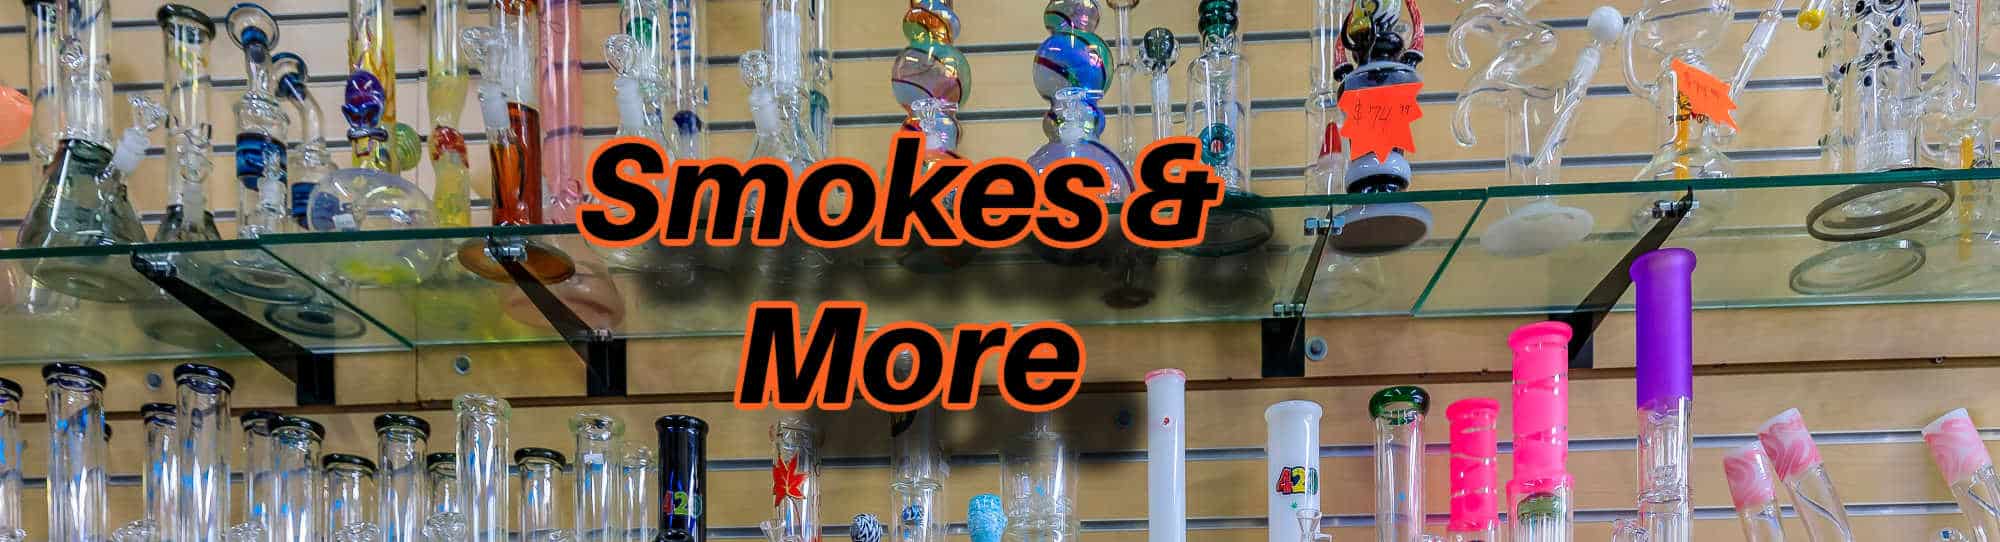 image of smokes & more shop in mountain view